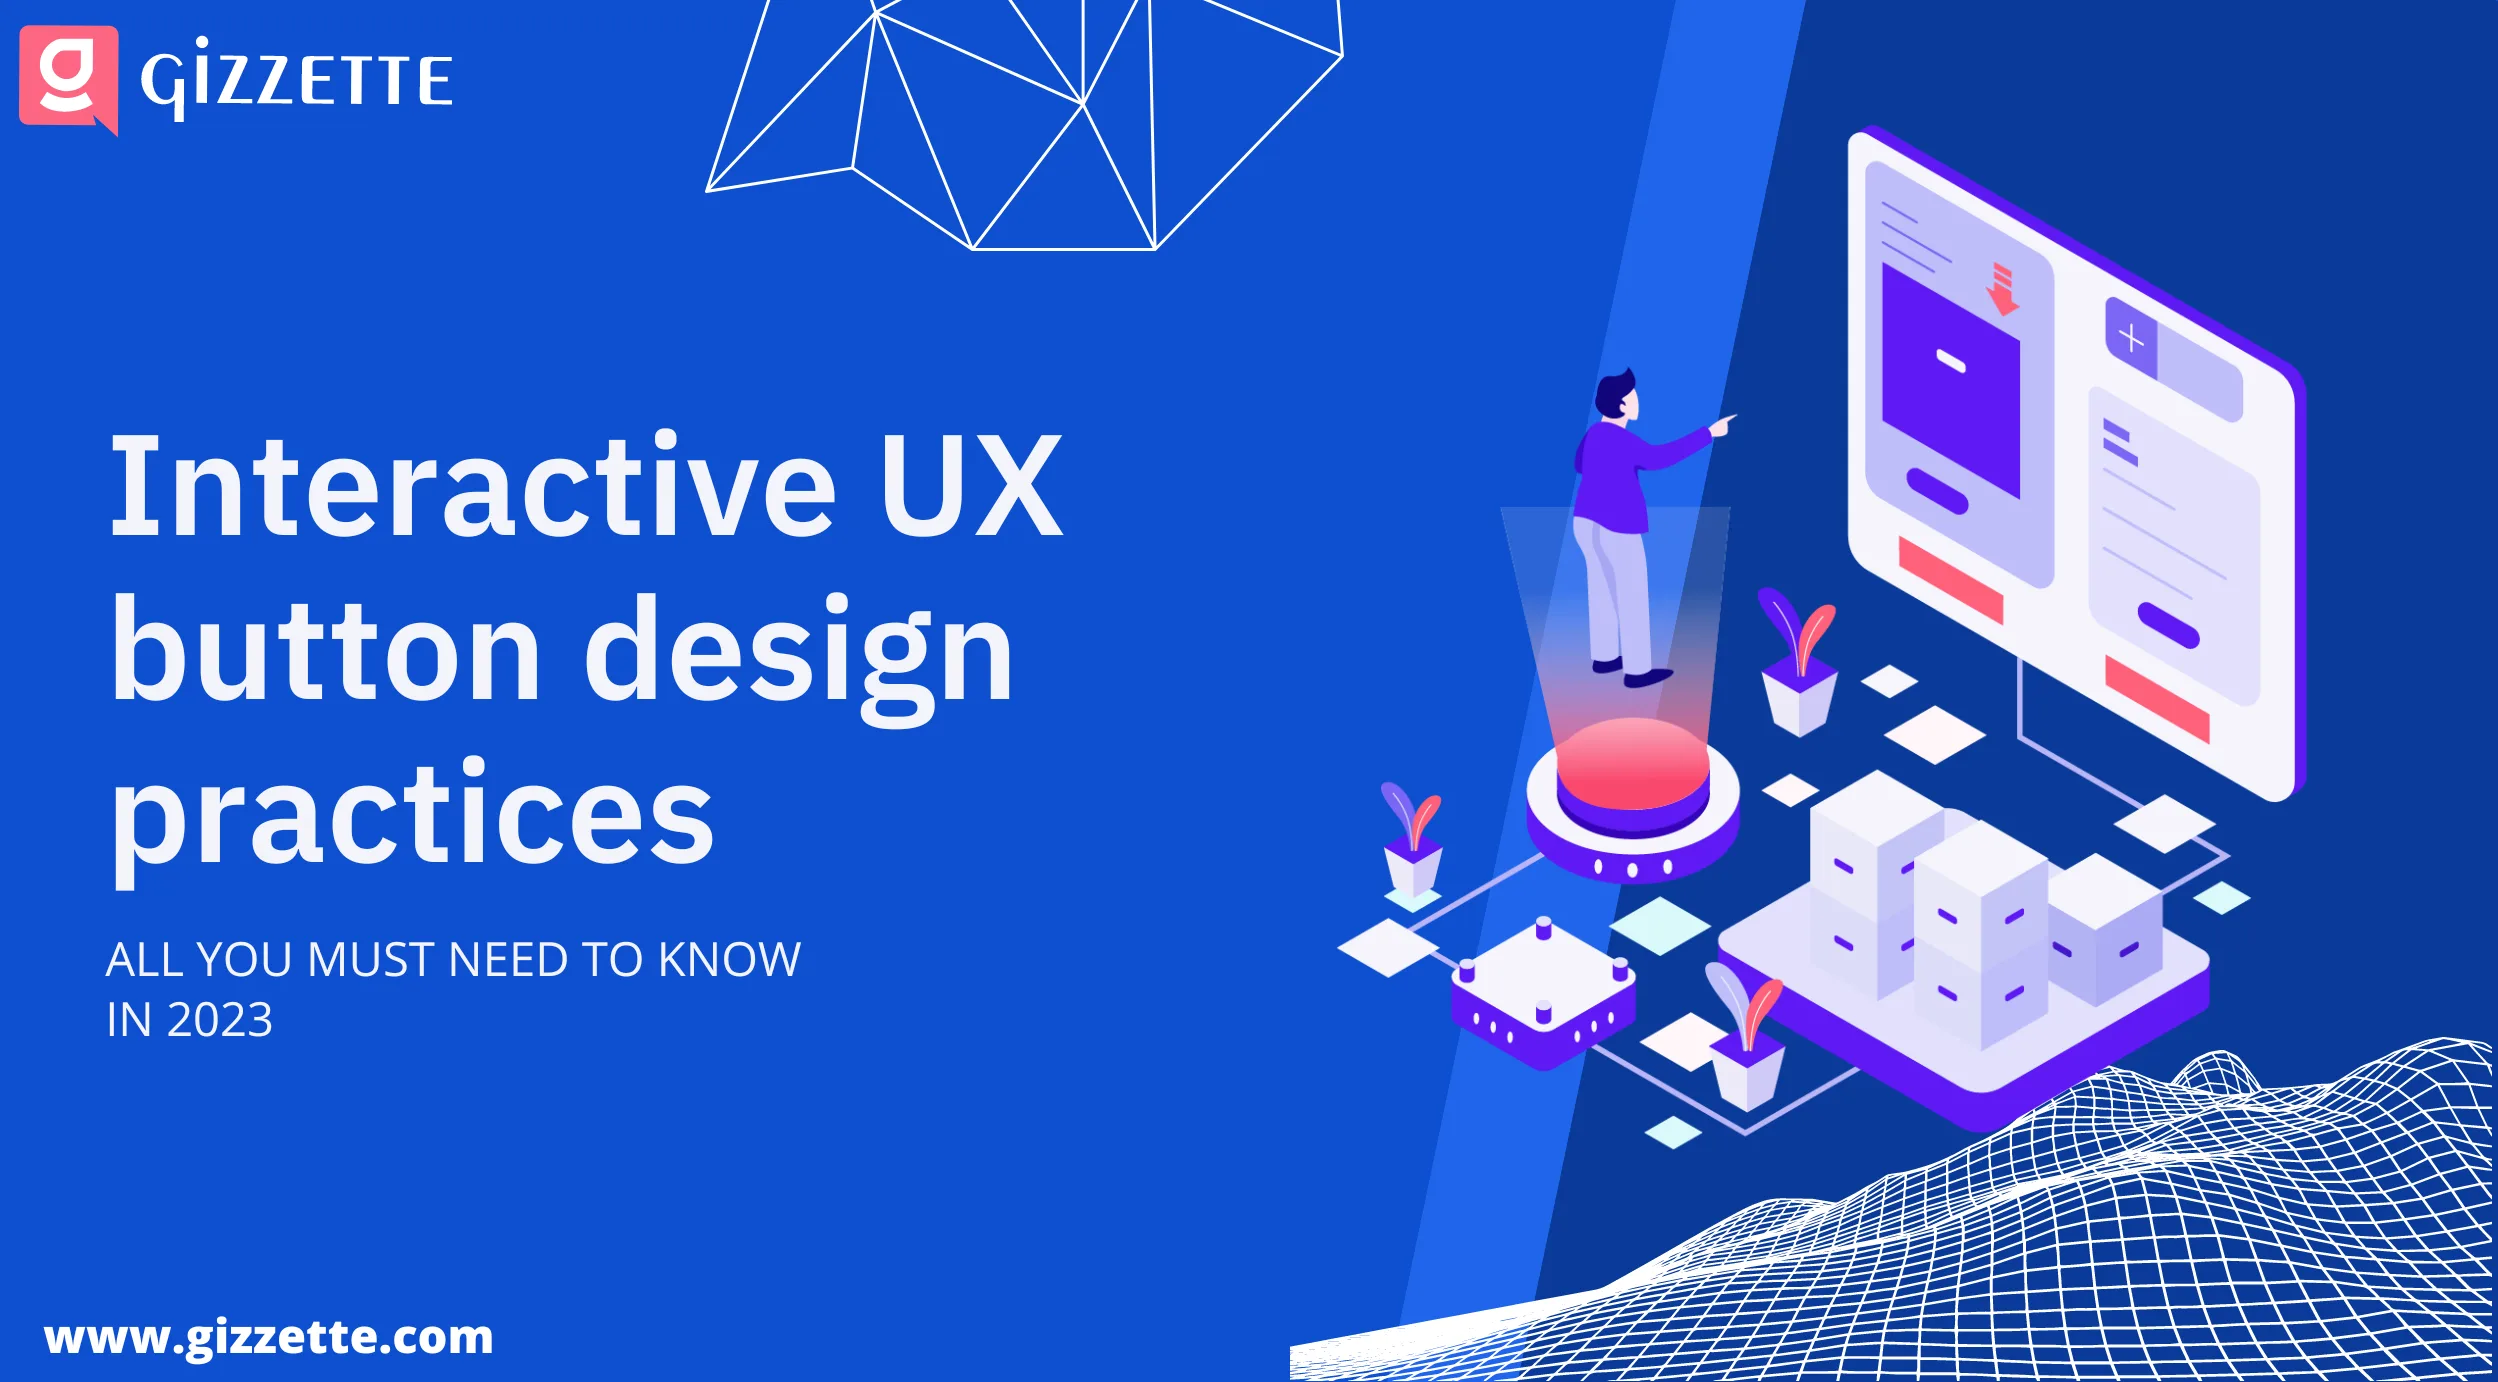 Interactive UX button design practices - all you need to know